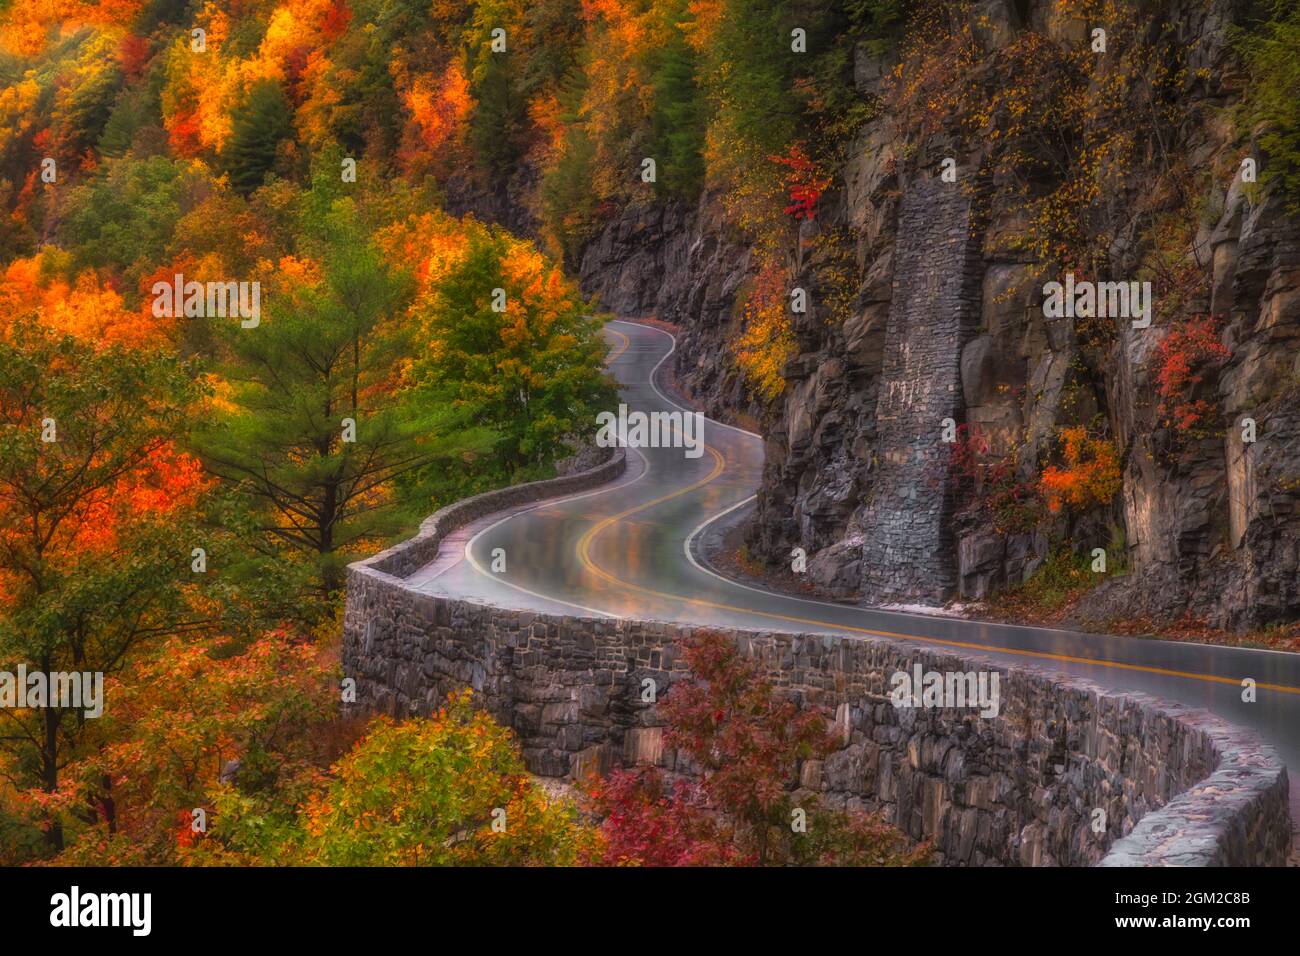 Autumn At Hawks Nest Road  - Car trails along the winding road during autumn in Port Jervis, New York.  This image is available in color as well as bl Stock Photo